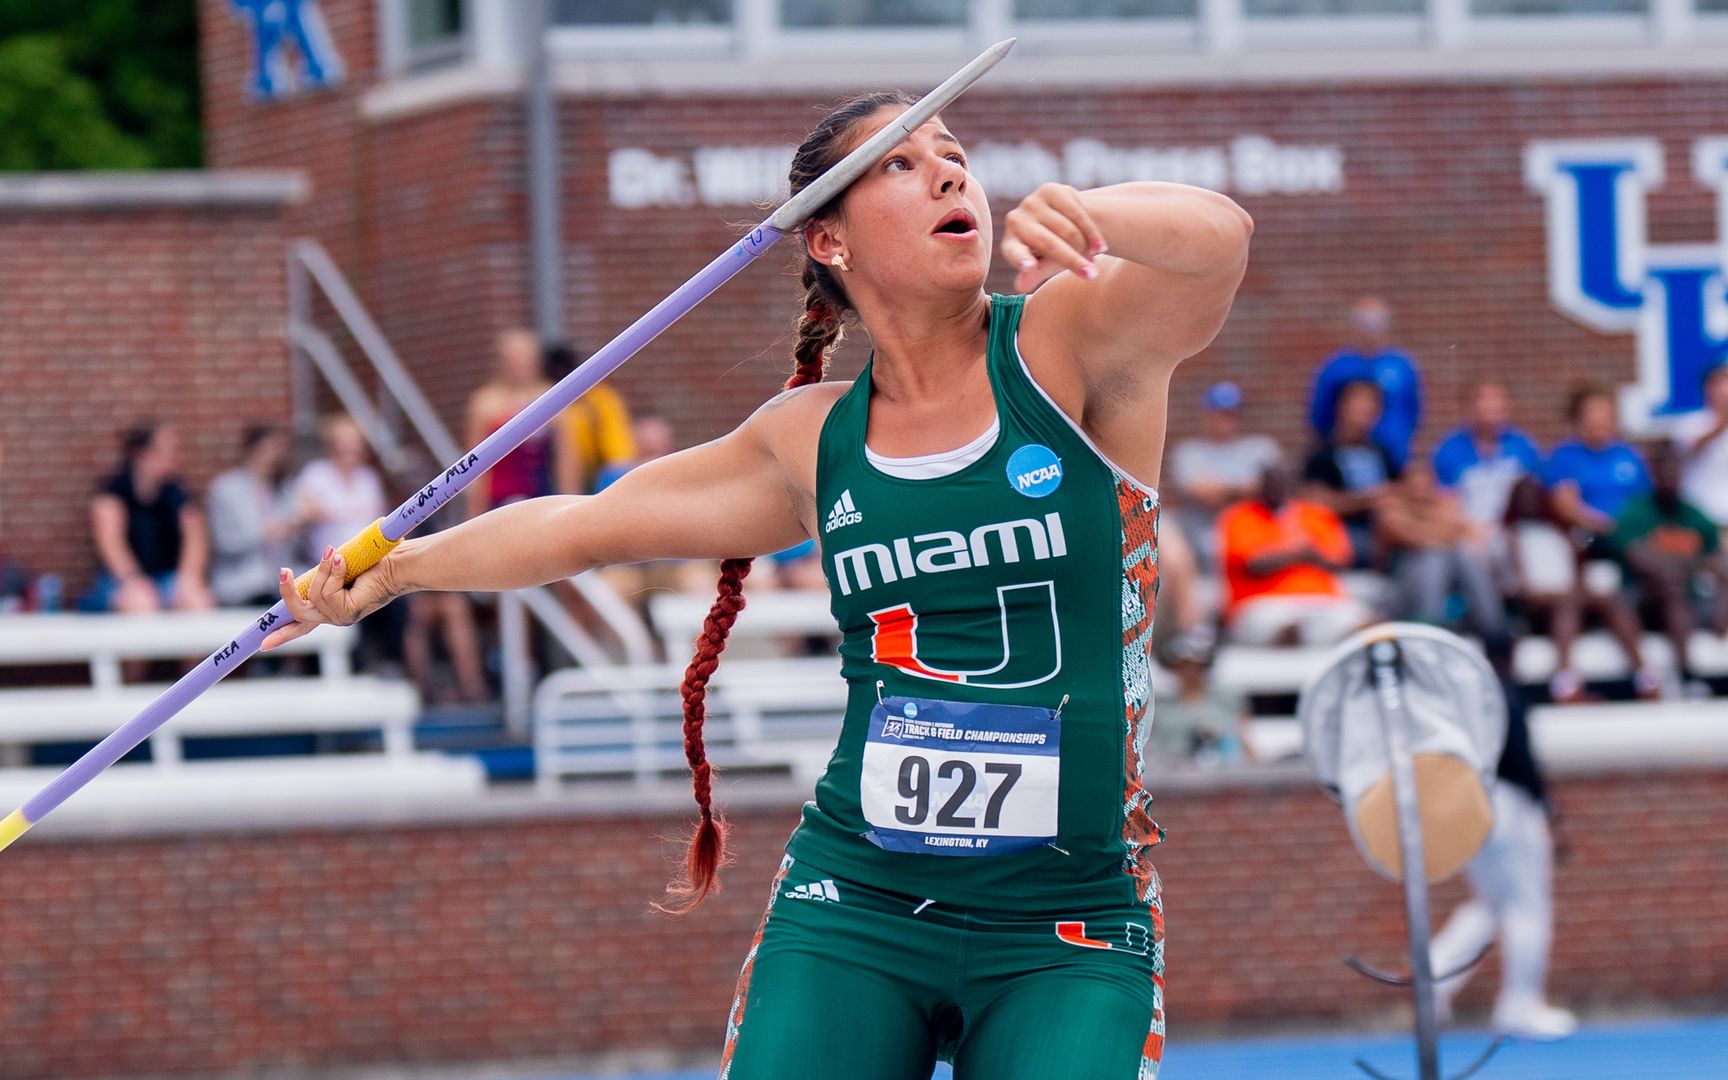 Teixeira Earns Bid to Oregon, Pierre-Webster and Varela Advance on Day Two of East Prelims